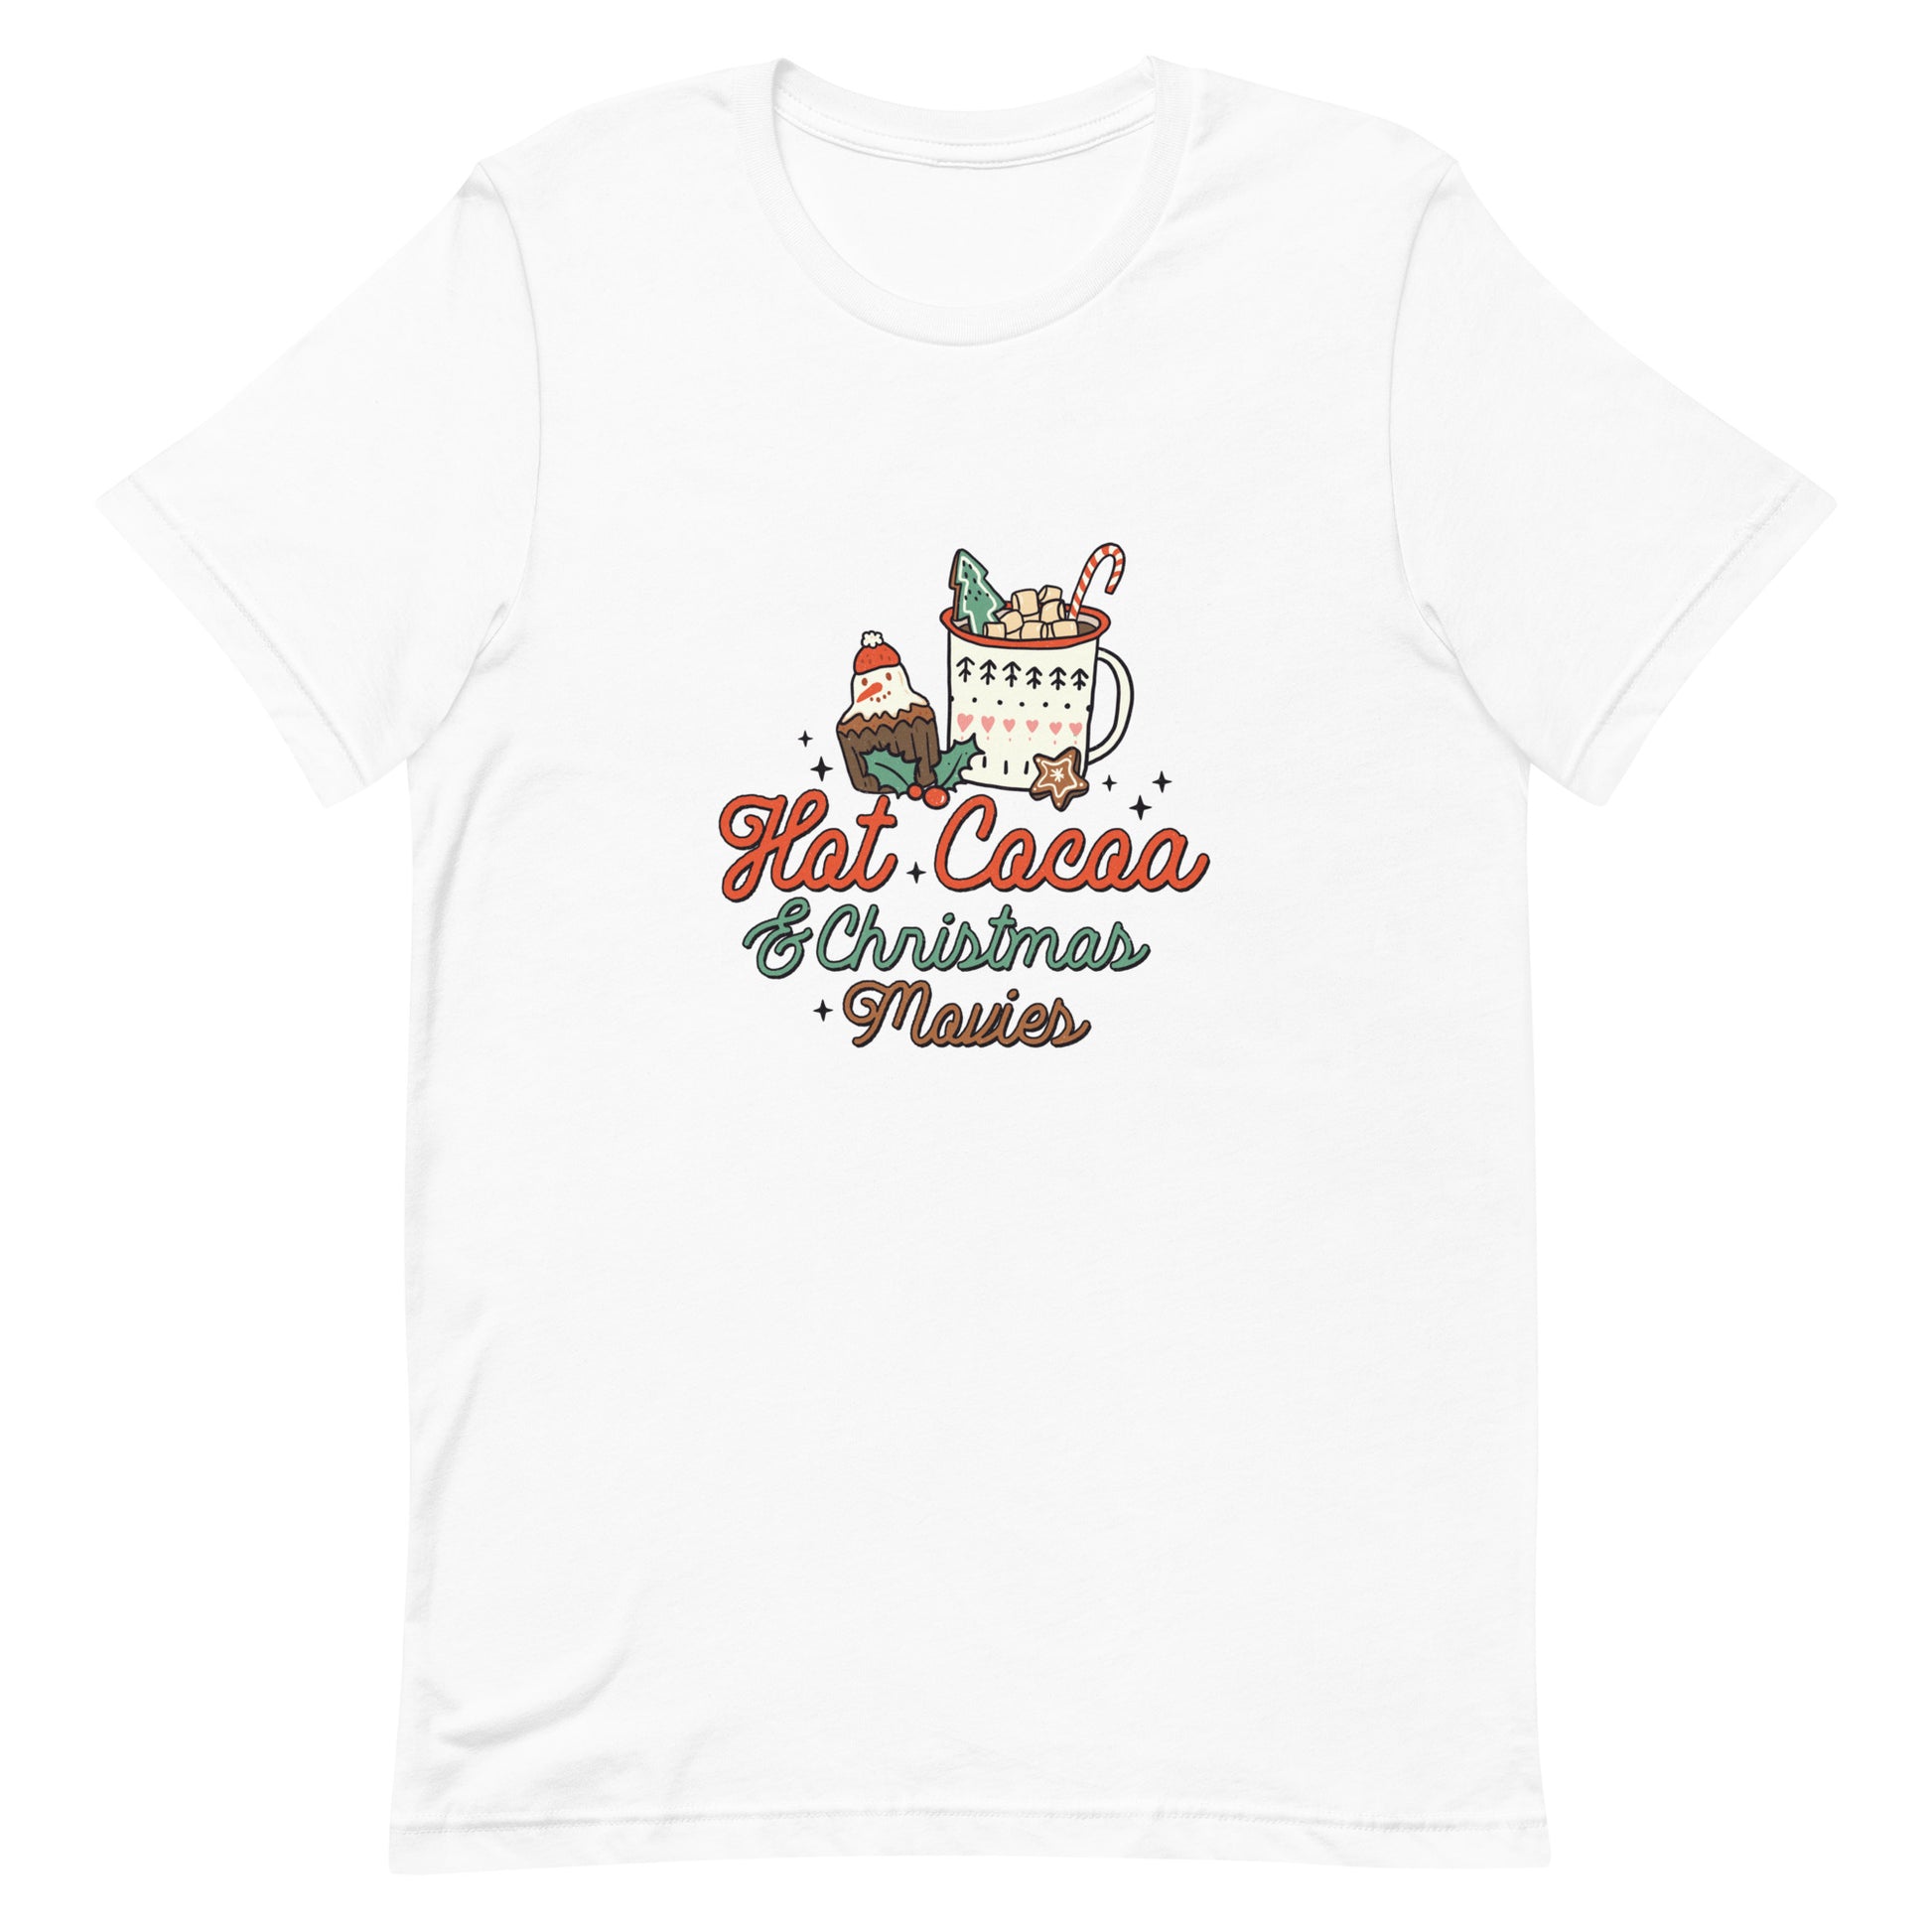 Hot Cocoa & Christmas Movies Unisex T-shirt - Holiday